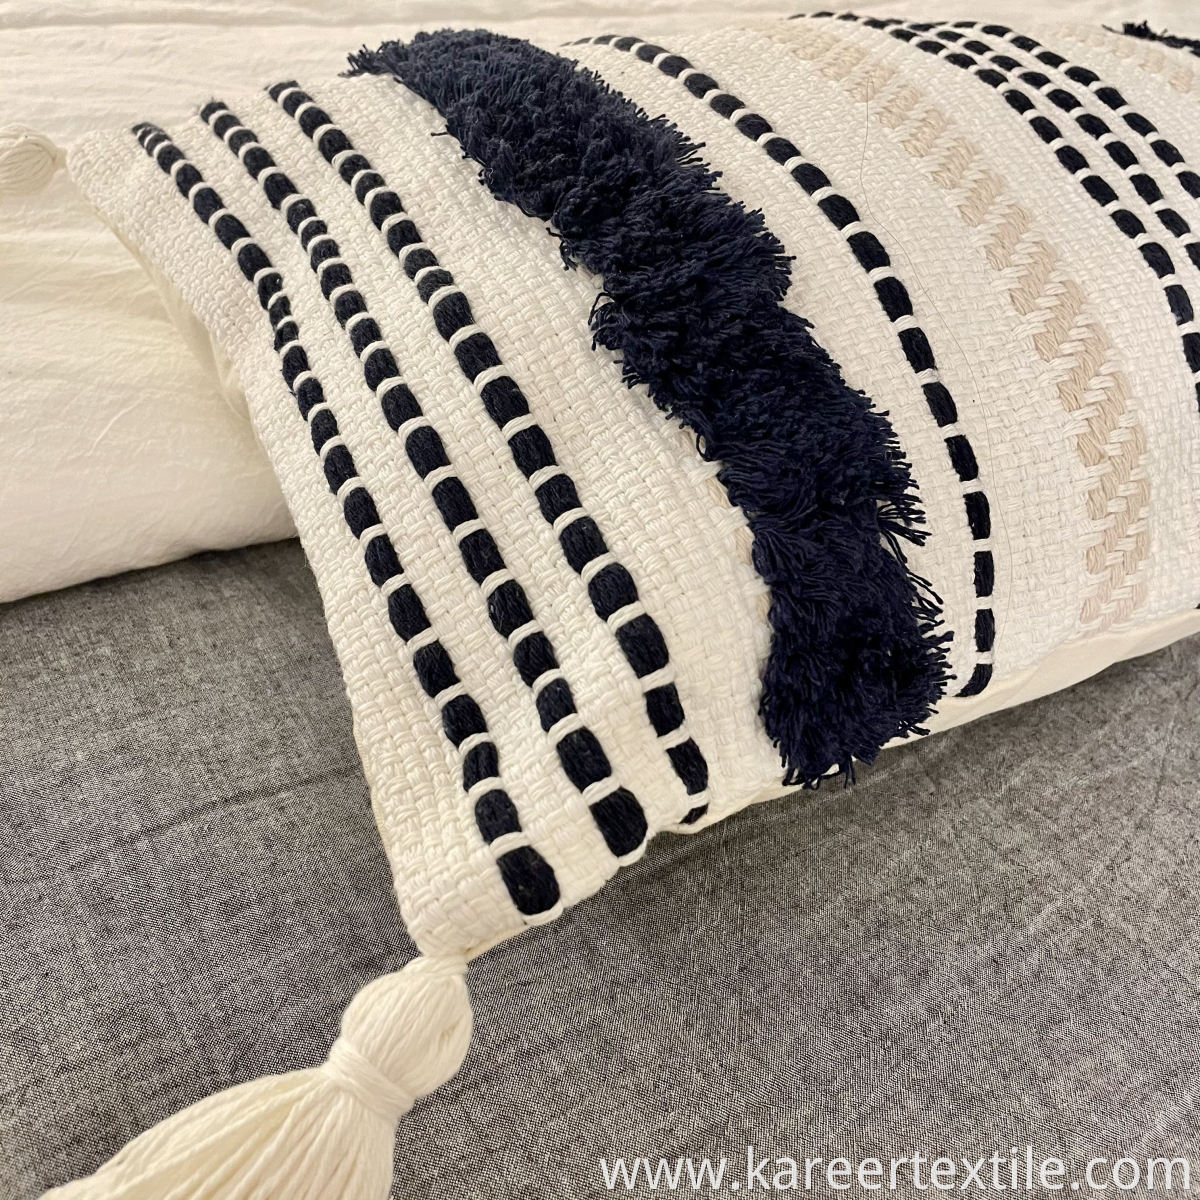 New Arrival Striped Pattern Cushion Bed Decor Long Cushion Cover with Tassels Decoration Woven Home Decor